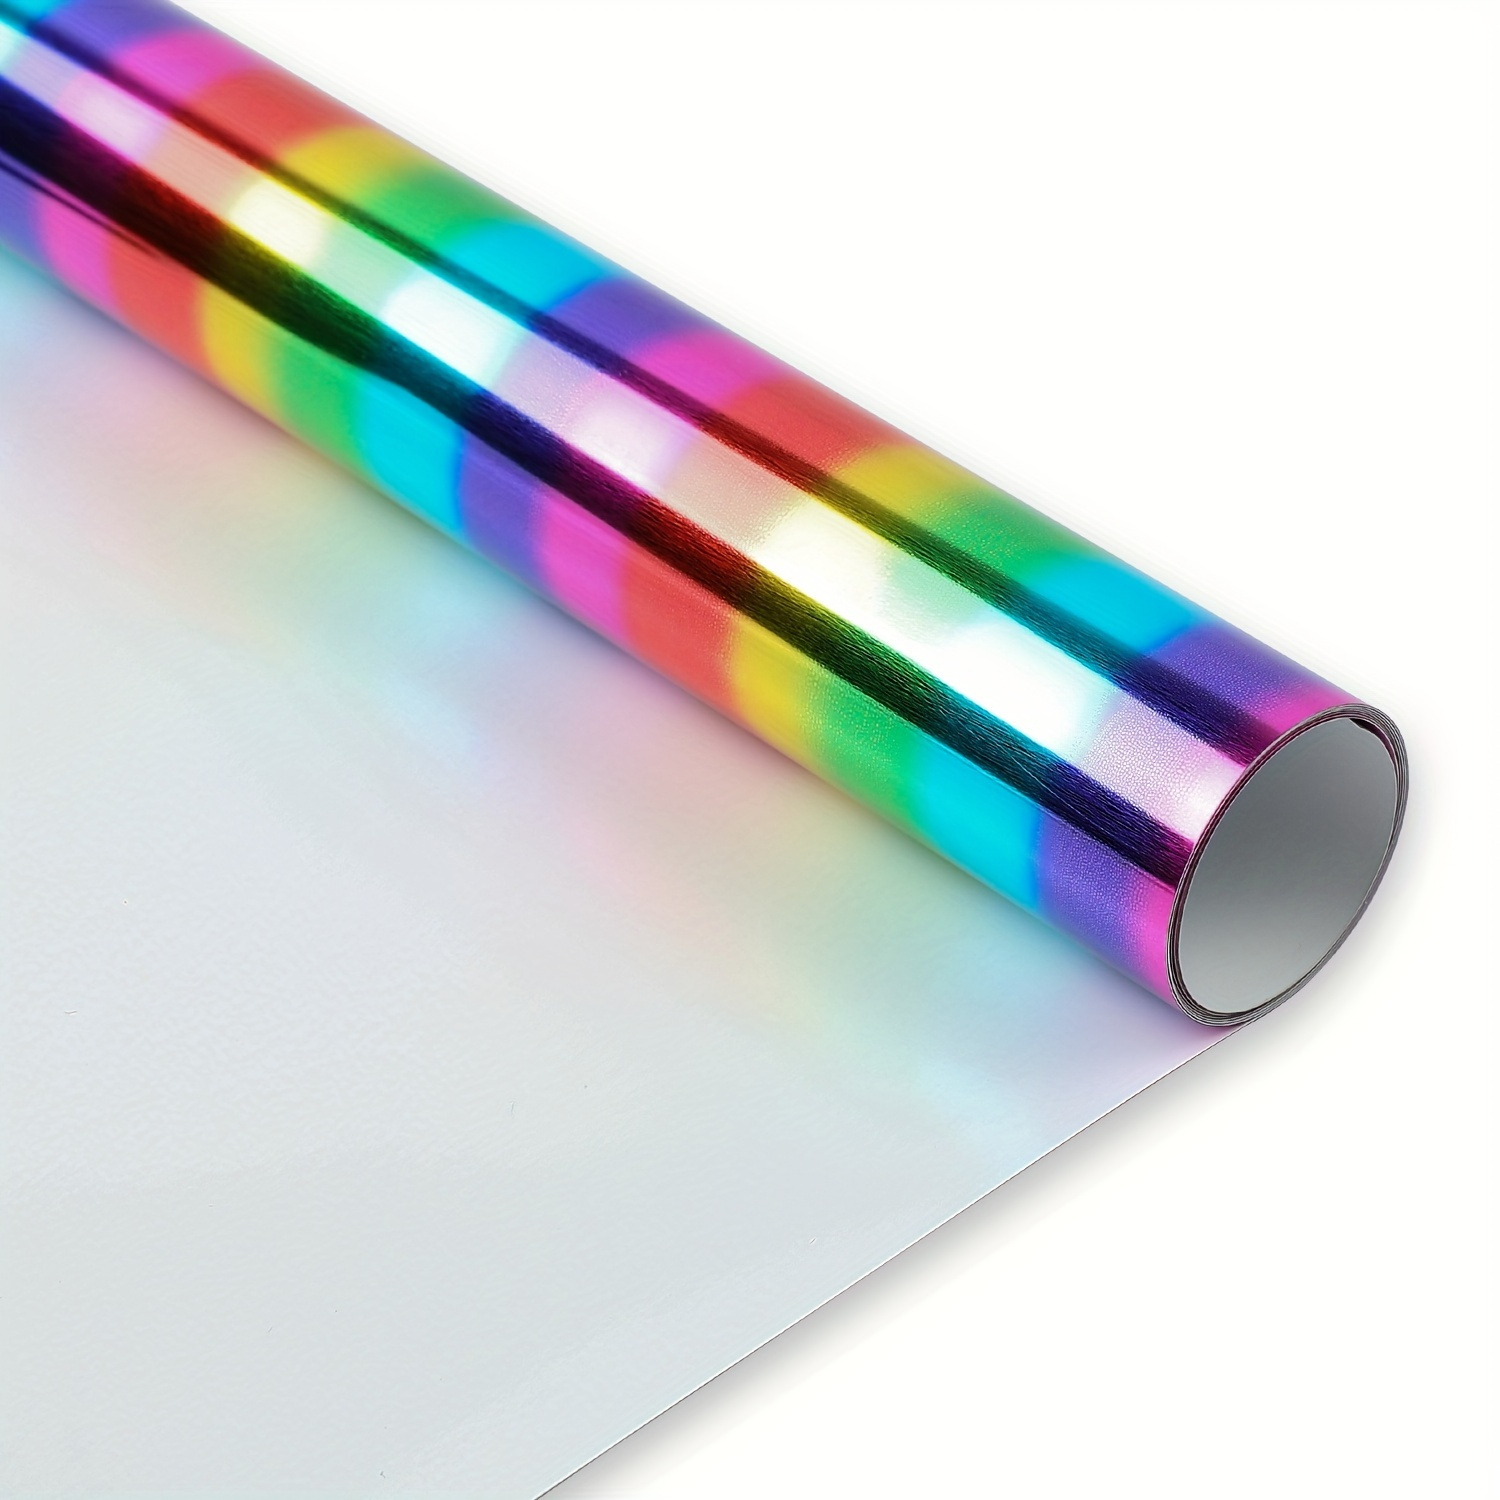 

1pc Holographic Iron On Heat Transfer Vinyl Roll 12inchx3ft For Cricut Machine, Iron On Vinyl For T Shirts Pillows